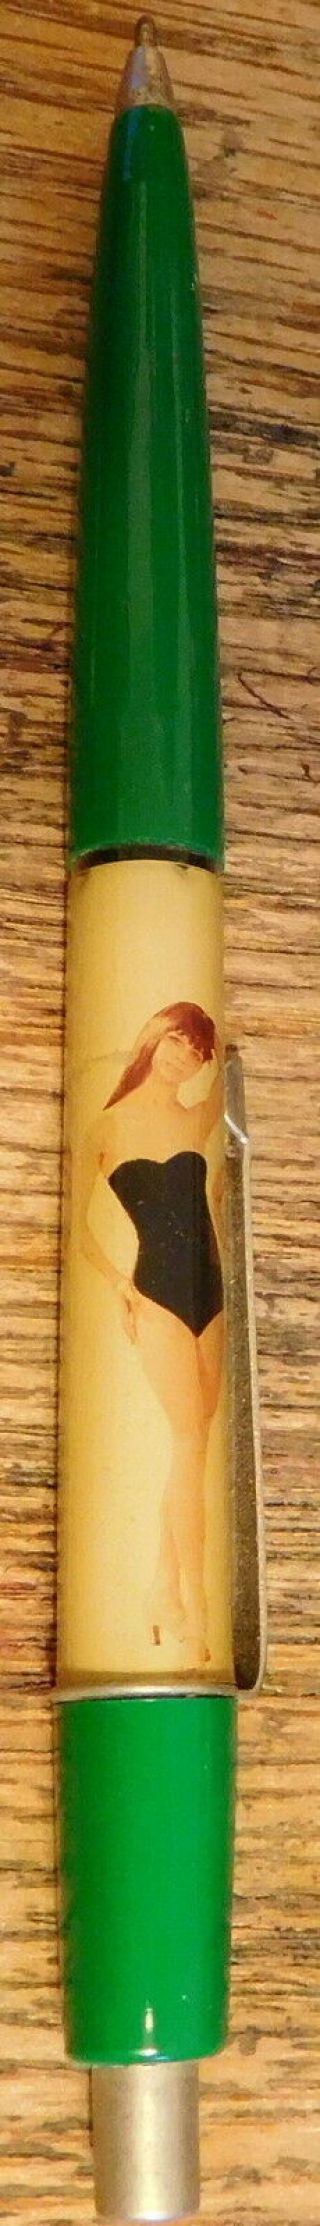 Vintage Naked Lady Stripper Floaty Pen Nude Woman Green Color